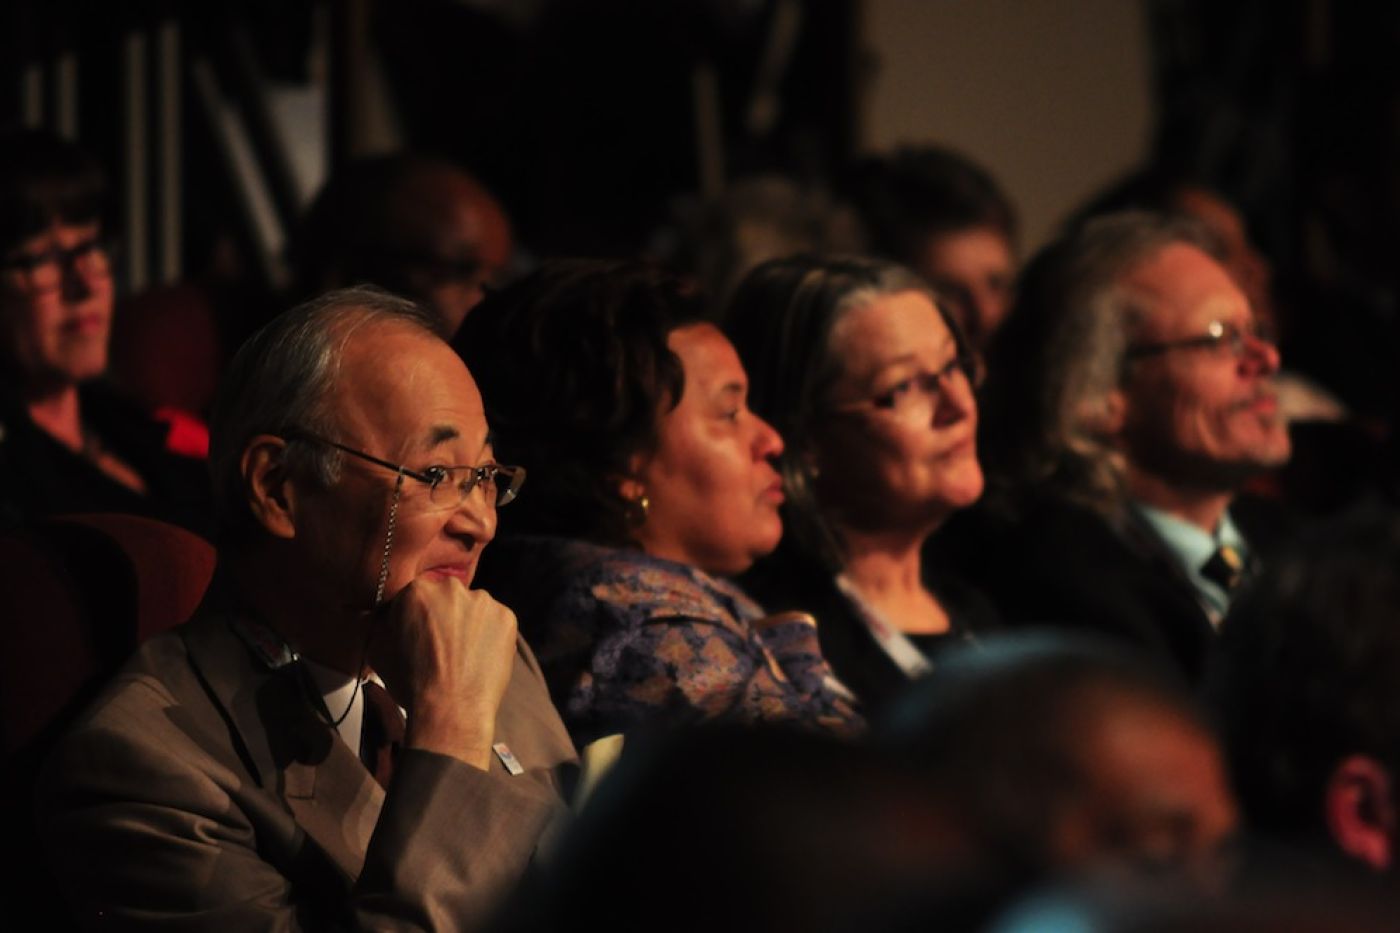 11th Nelson Mandela Annual Lecture, audience